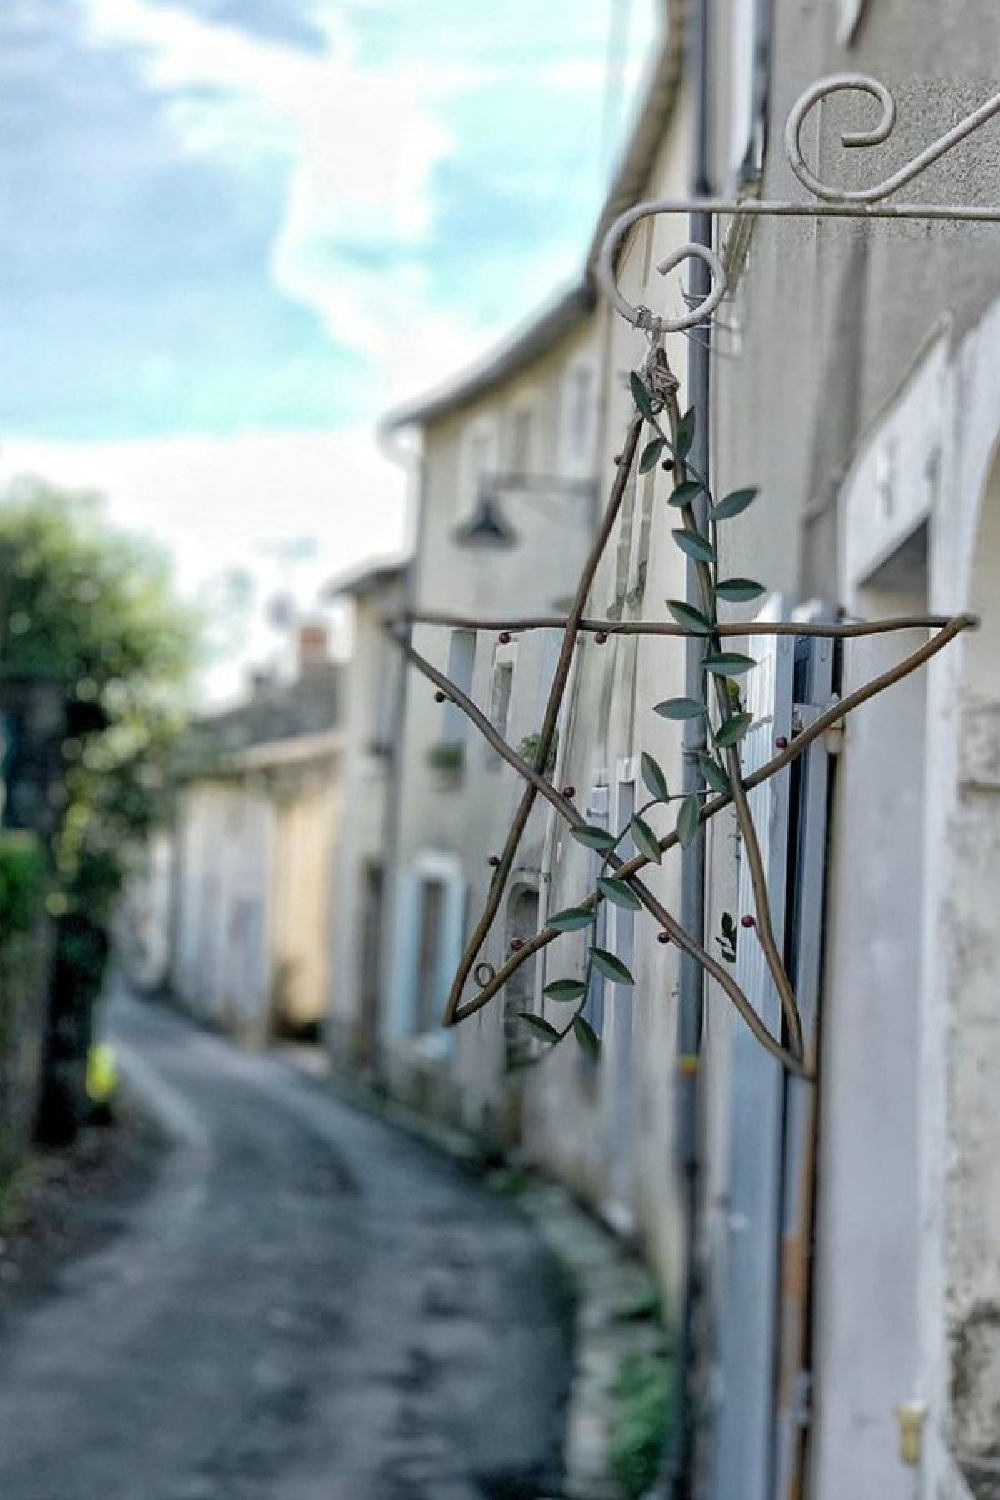 French Christmas star on a glorious stucco exterior in France. Vivi et Margot. #frenchchristmas #christmasinfrance #christmasstar #europeanchristmas